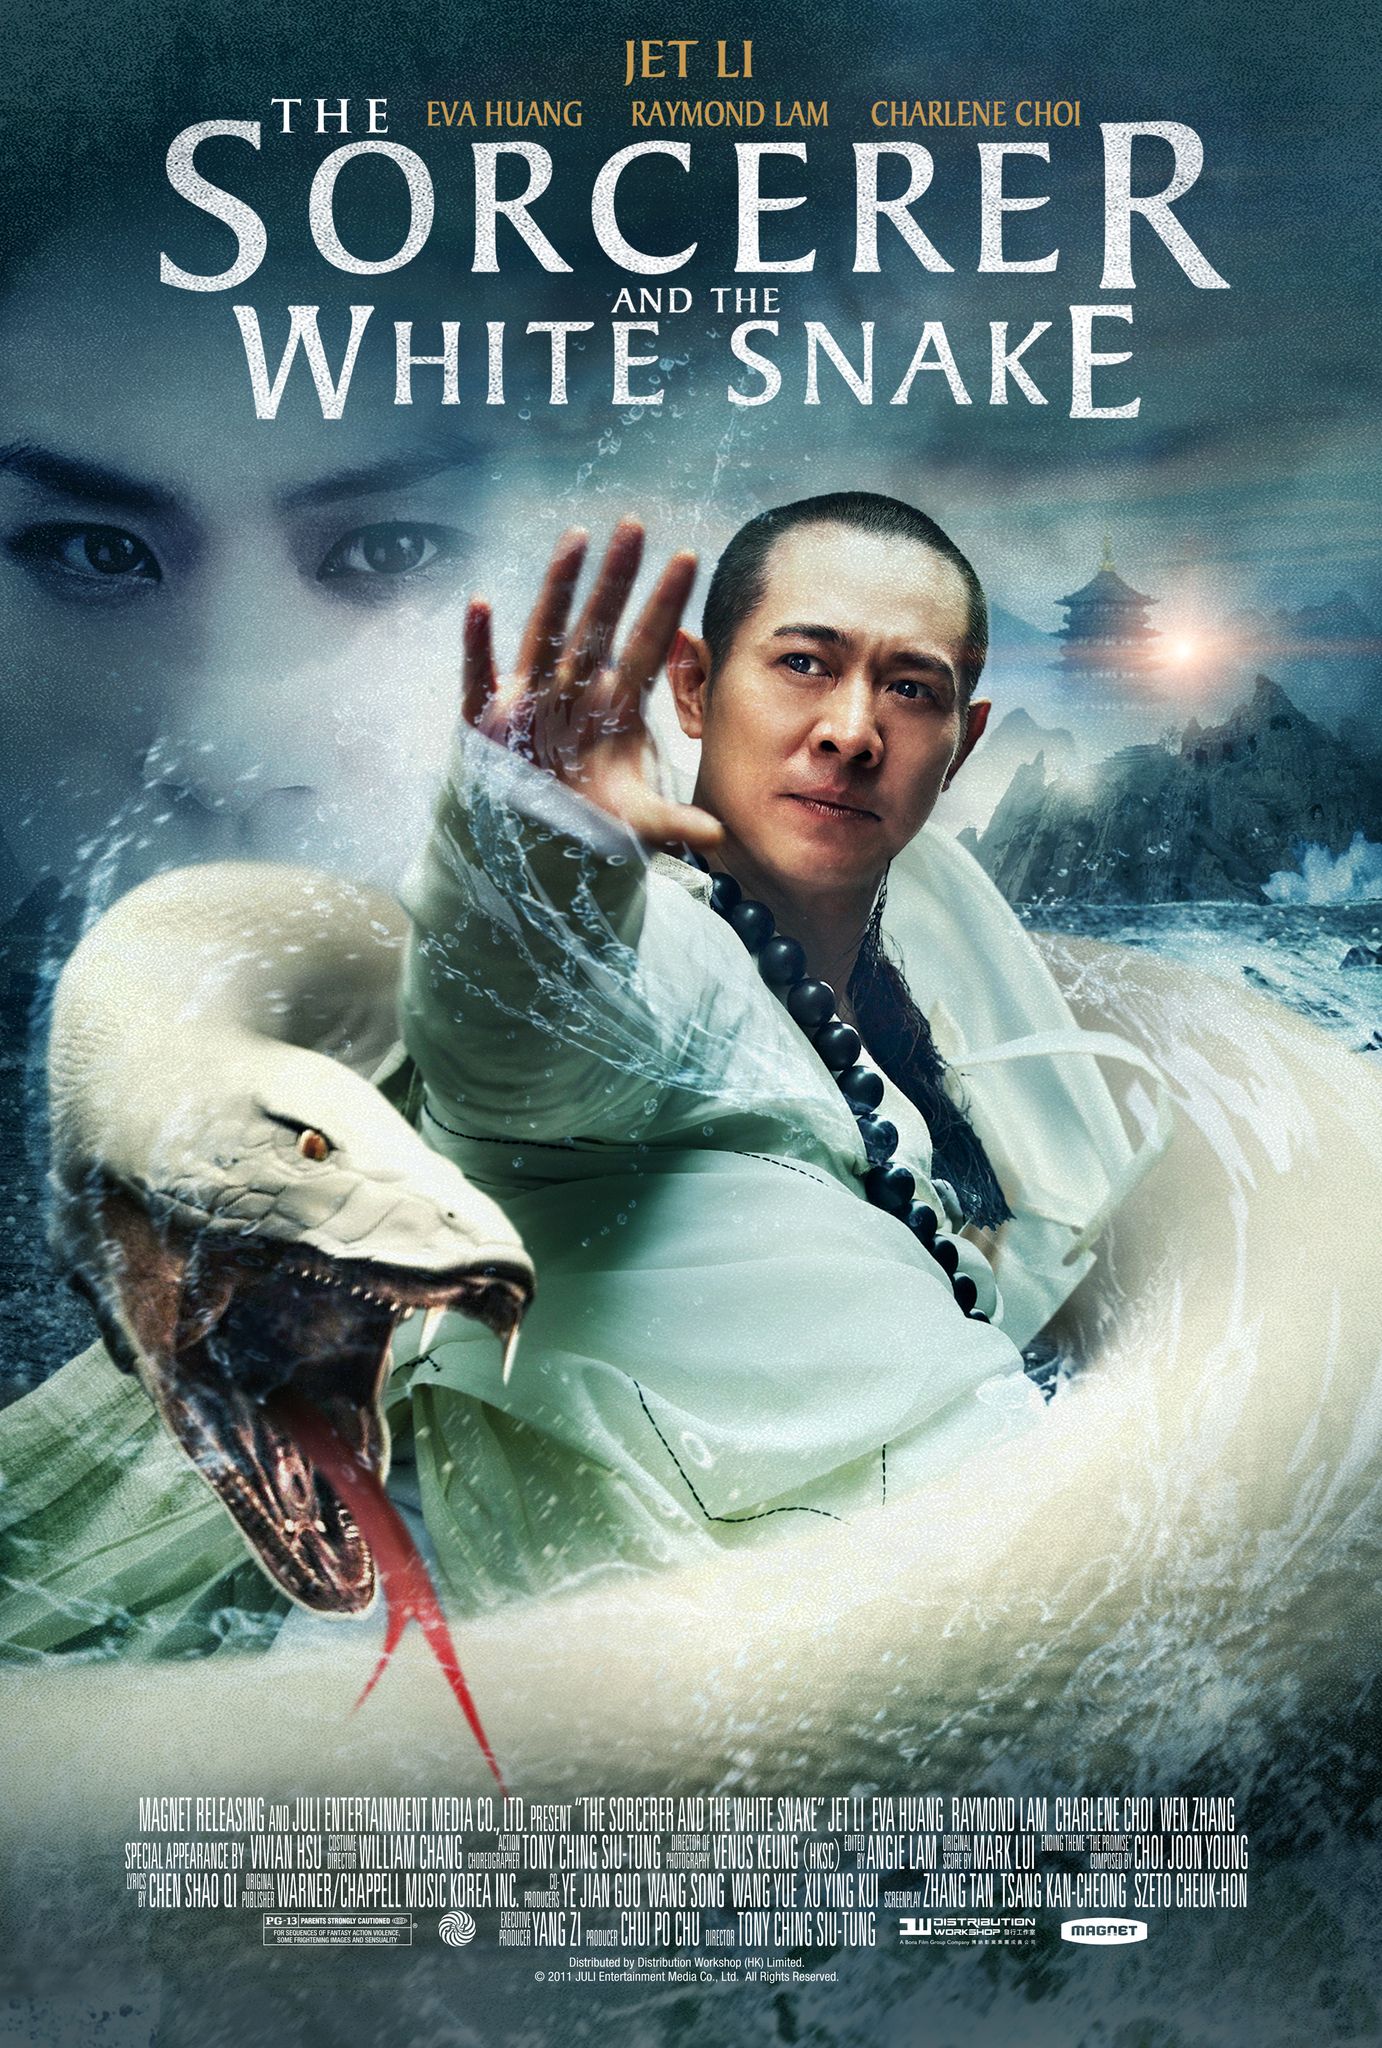 The Sorcerer and the White Snake (2011) Hindi Dubbed BluRay download full movie